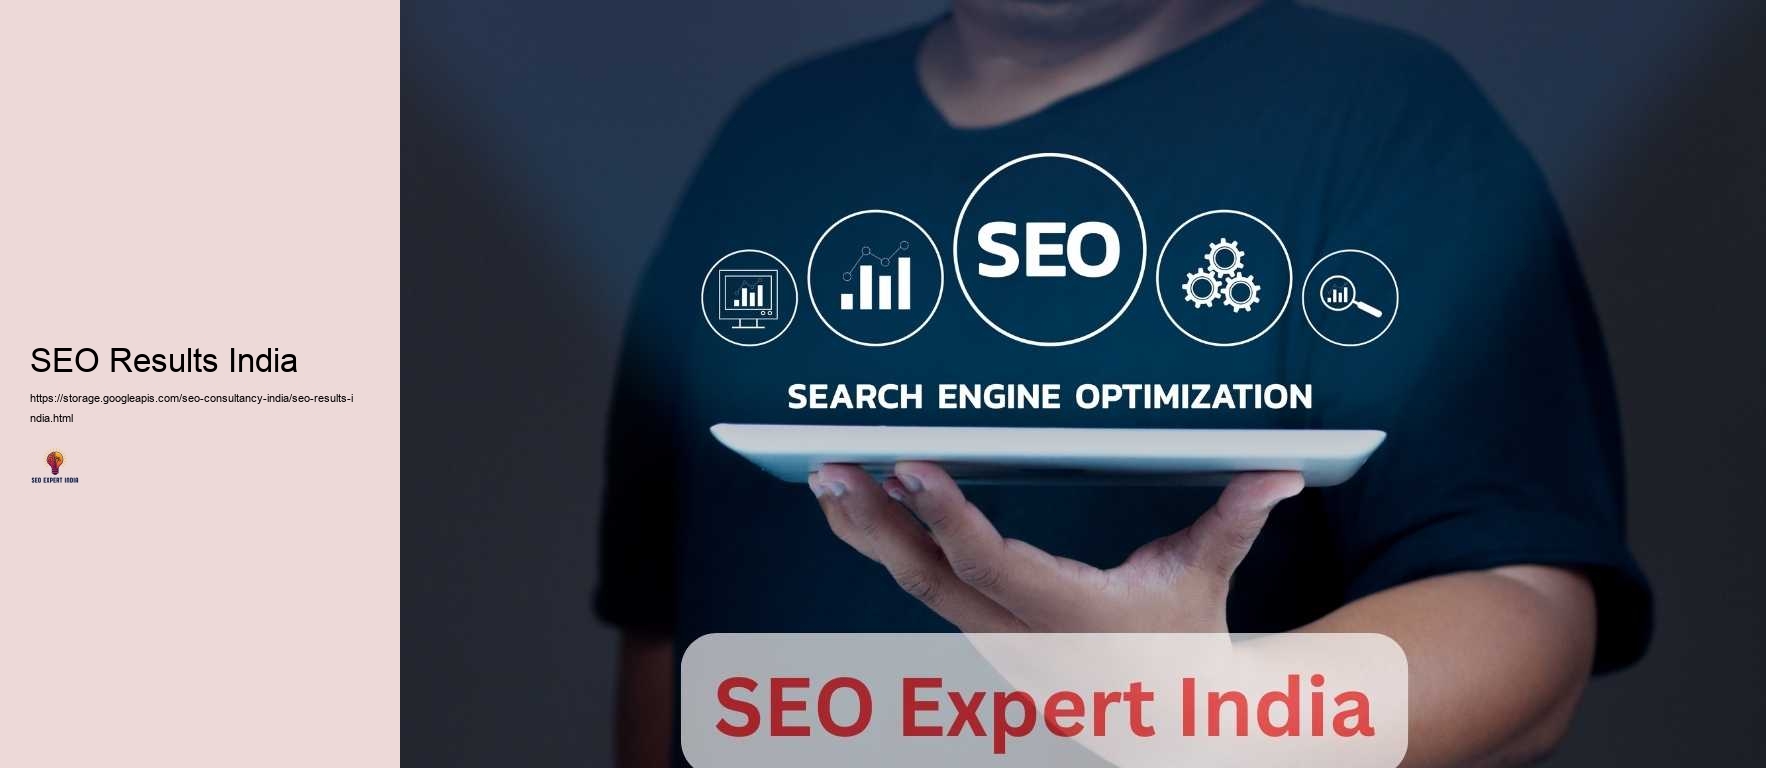 SEO Results India